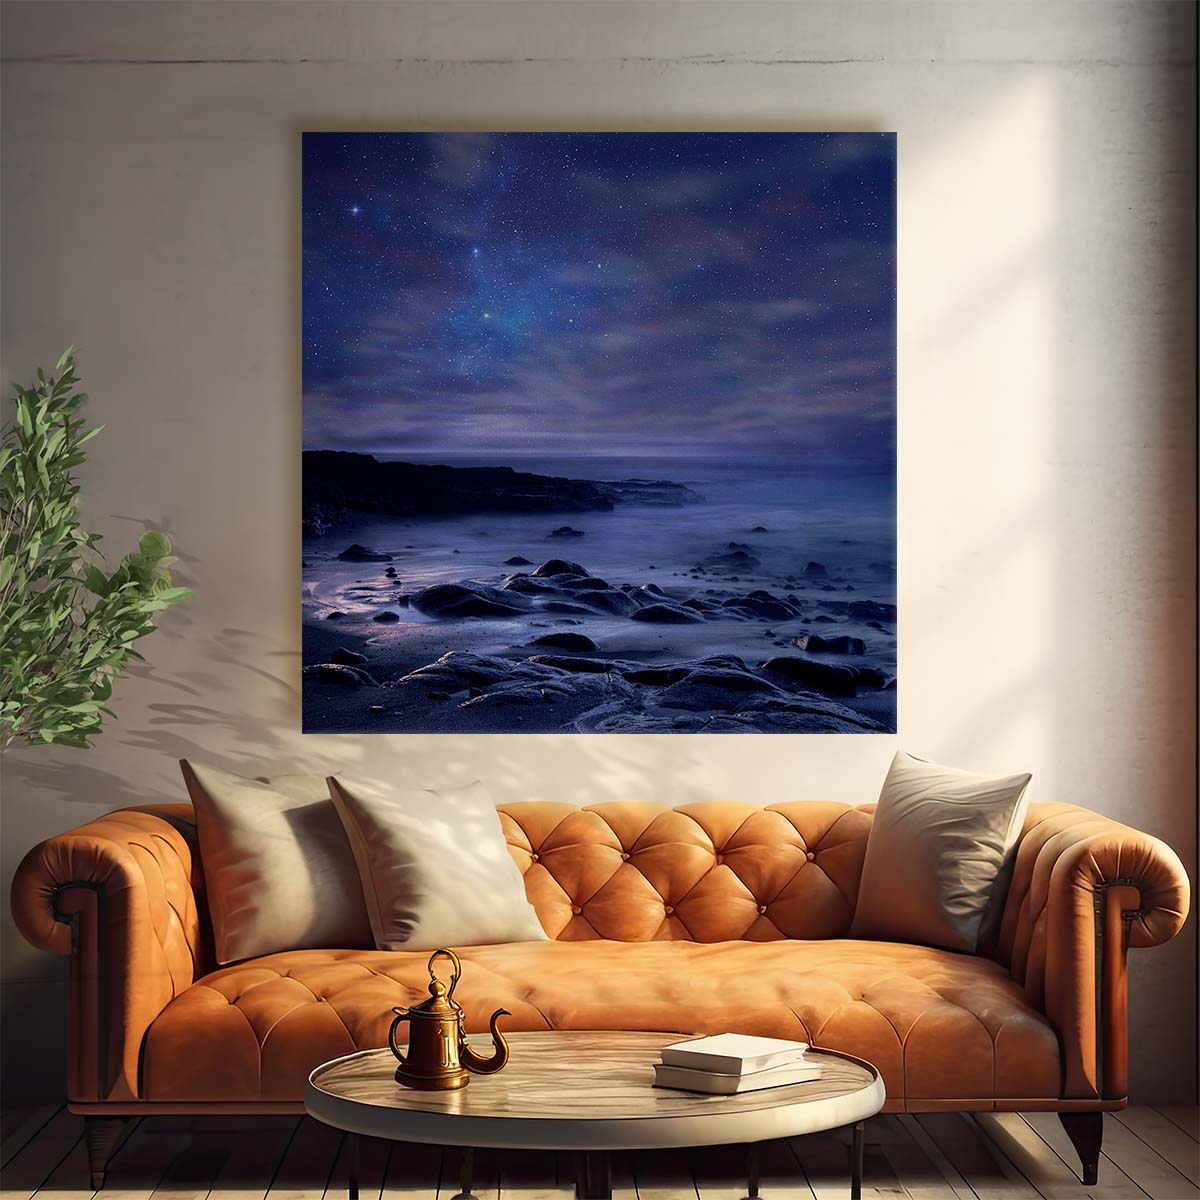 Serenity of the Sea & Starlit Sky Photography Wall Art by Luxuriance Designs. Made in USA.